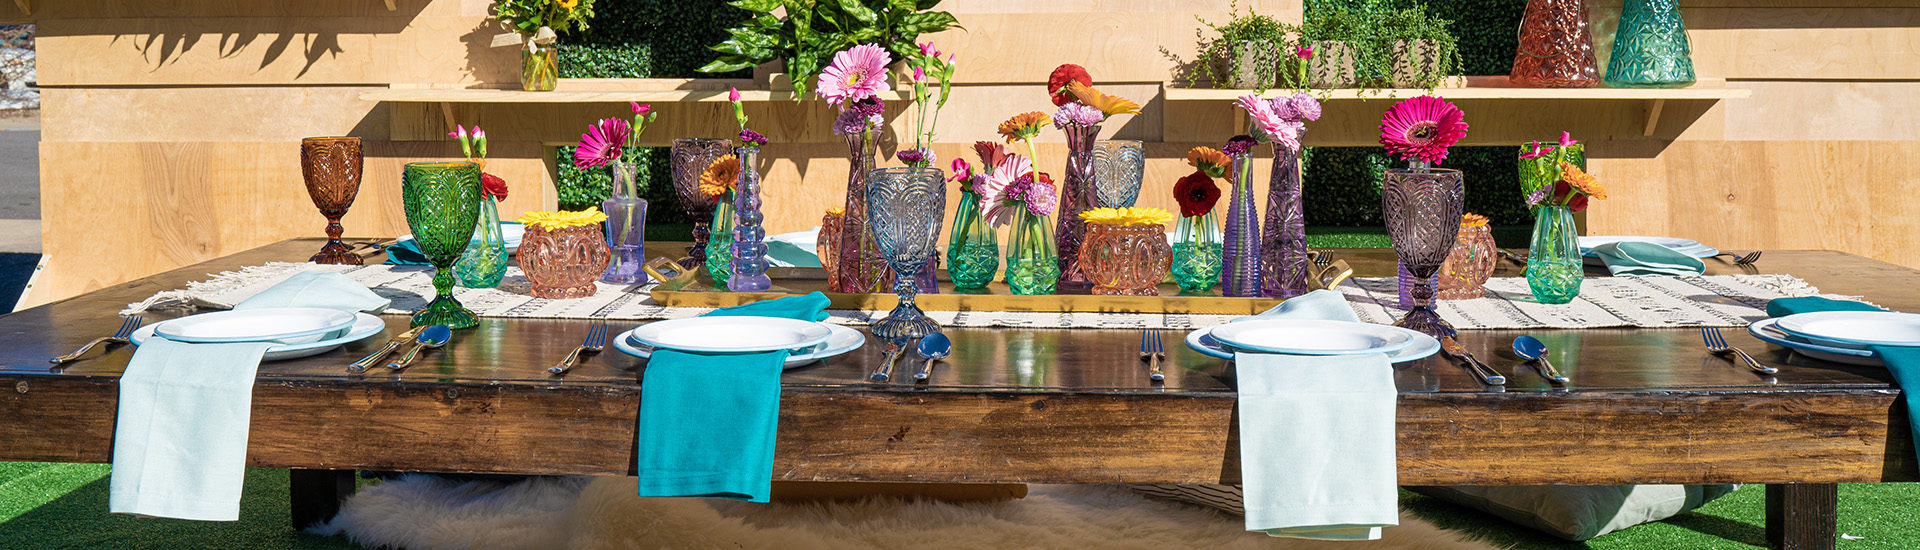 Large wooden table decorated with colorful vases full of different colored pink flowers and plated with different shaded of blue napkins